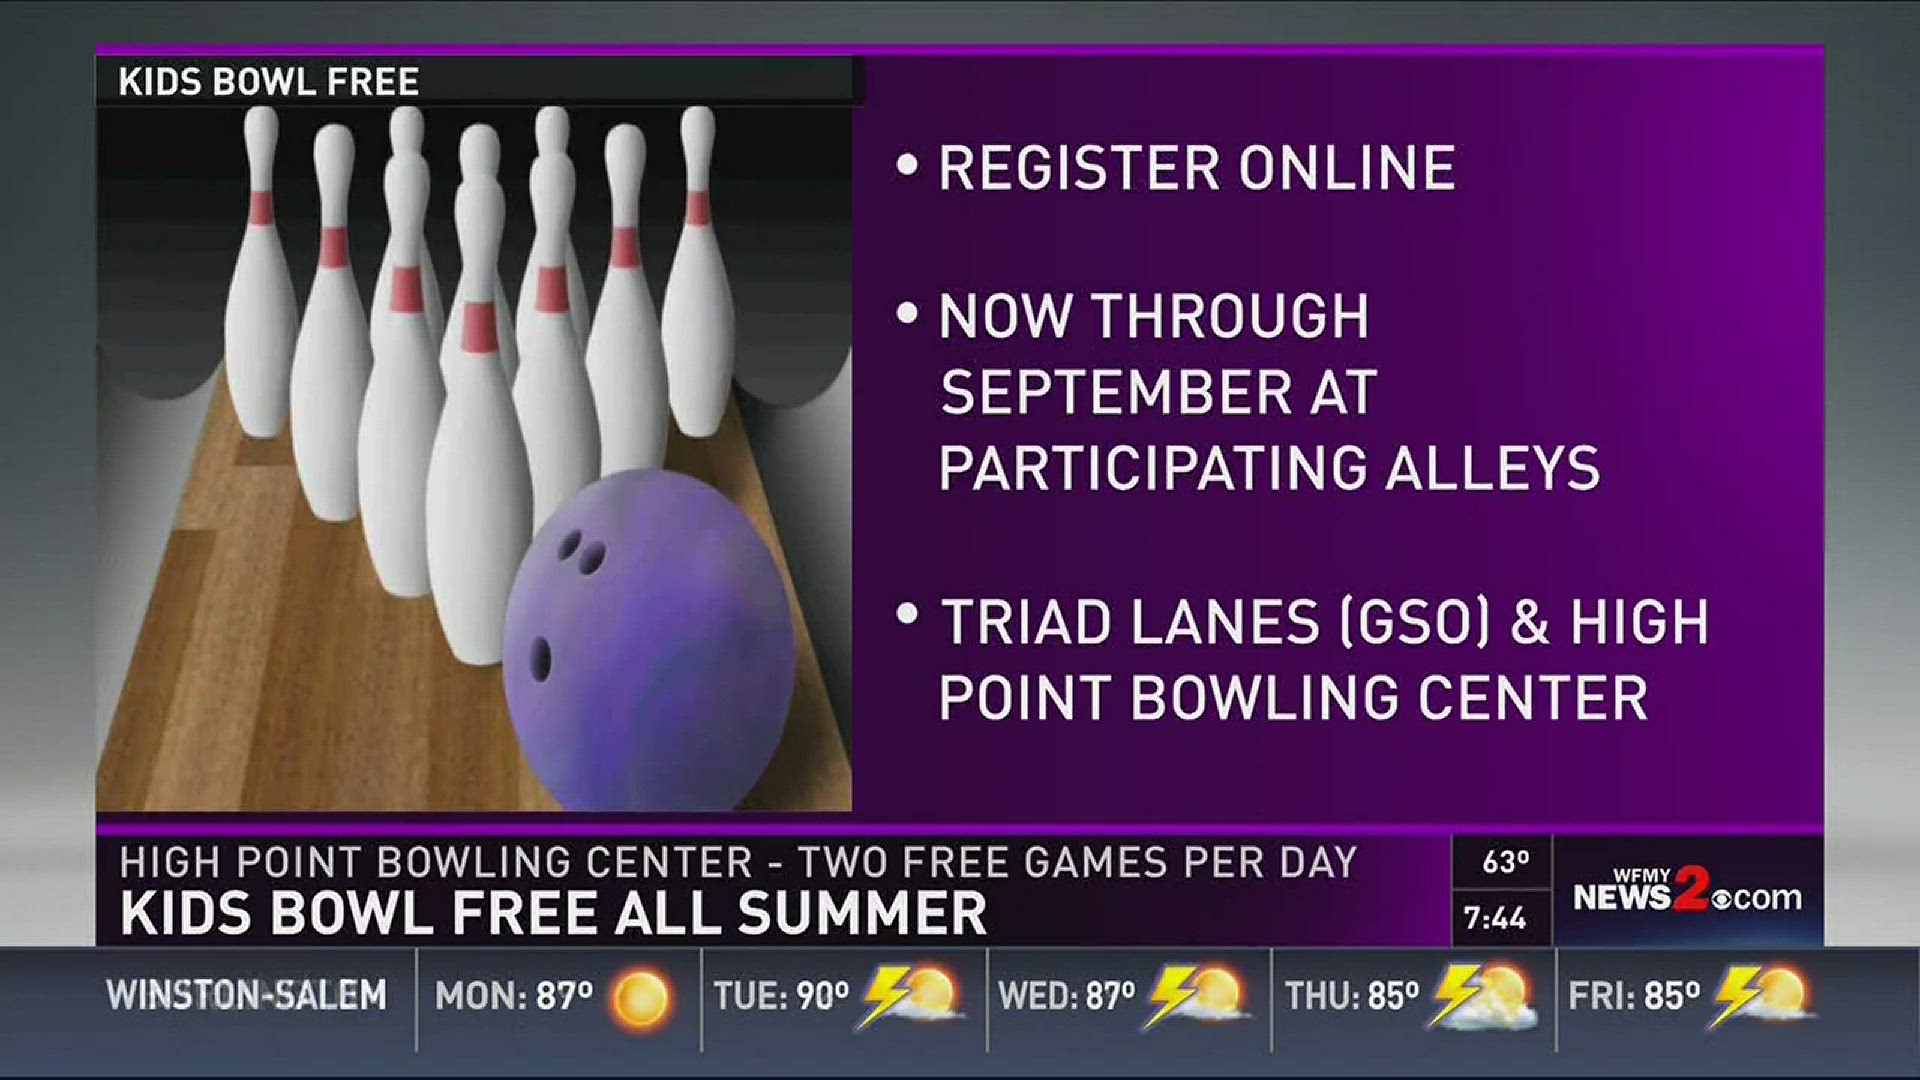 High Point Bowling Center Offers Free Games for Kids This Summer wfmynews2